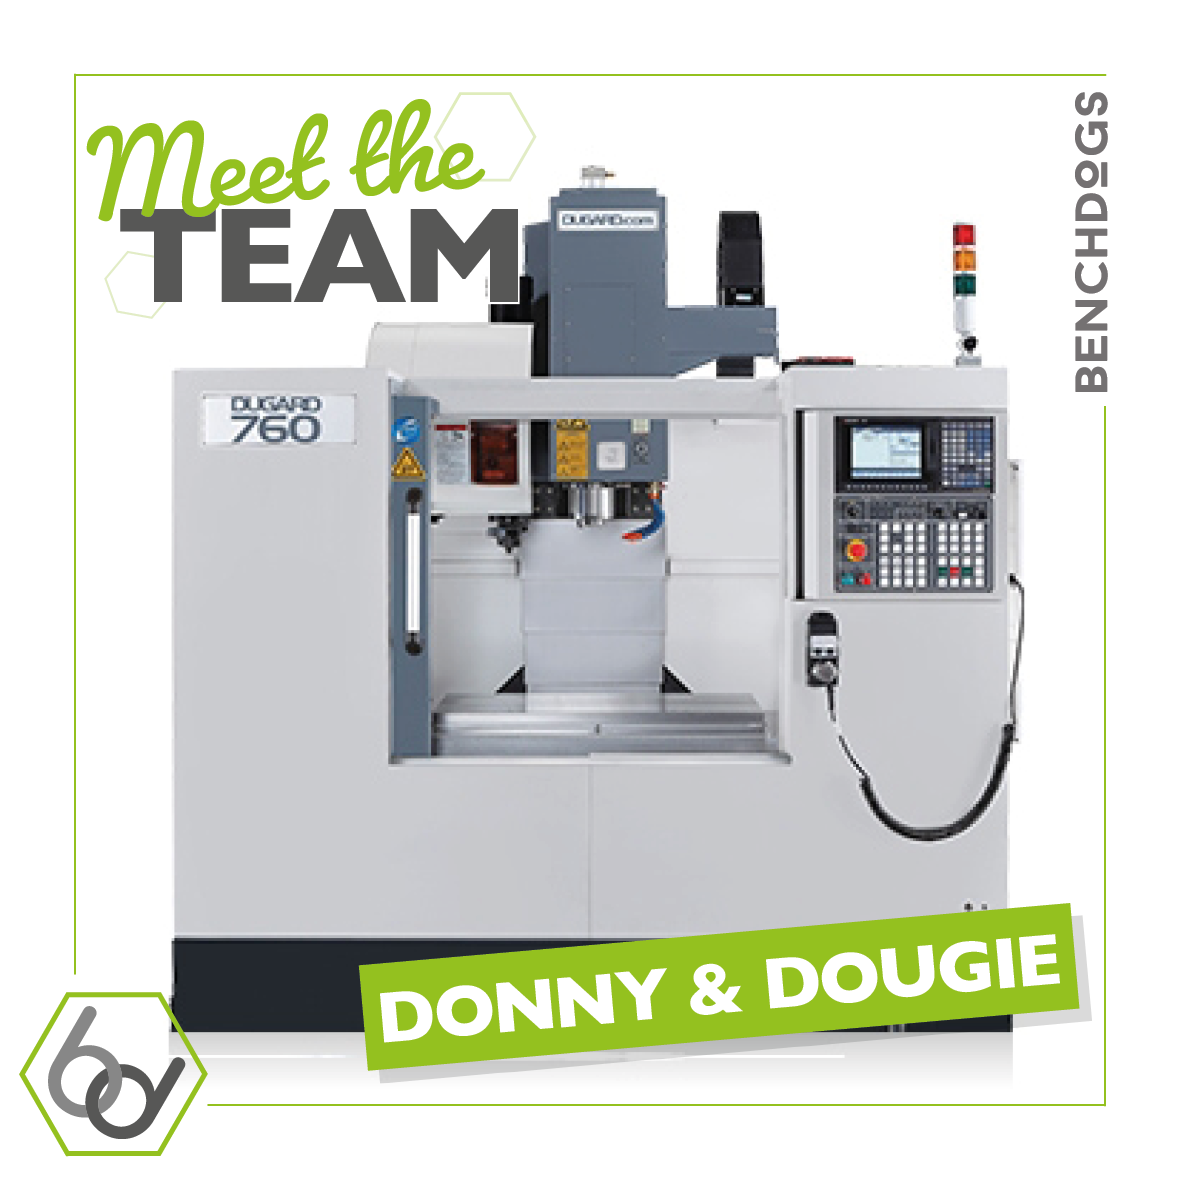 Our Machines - Donny & Dougie